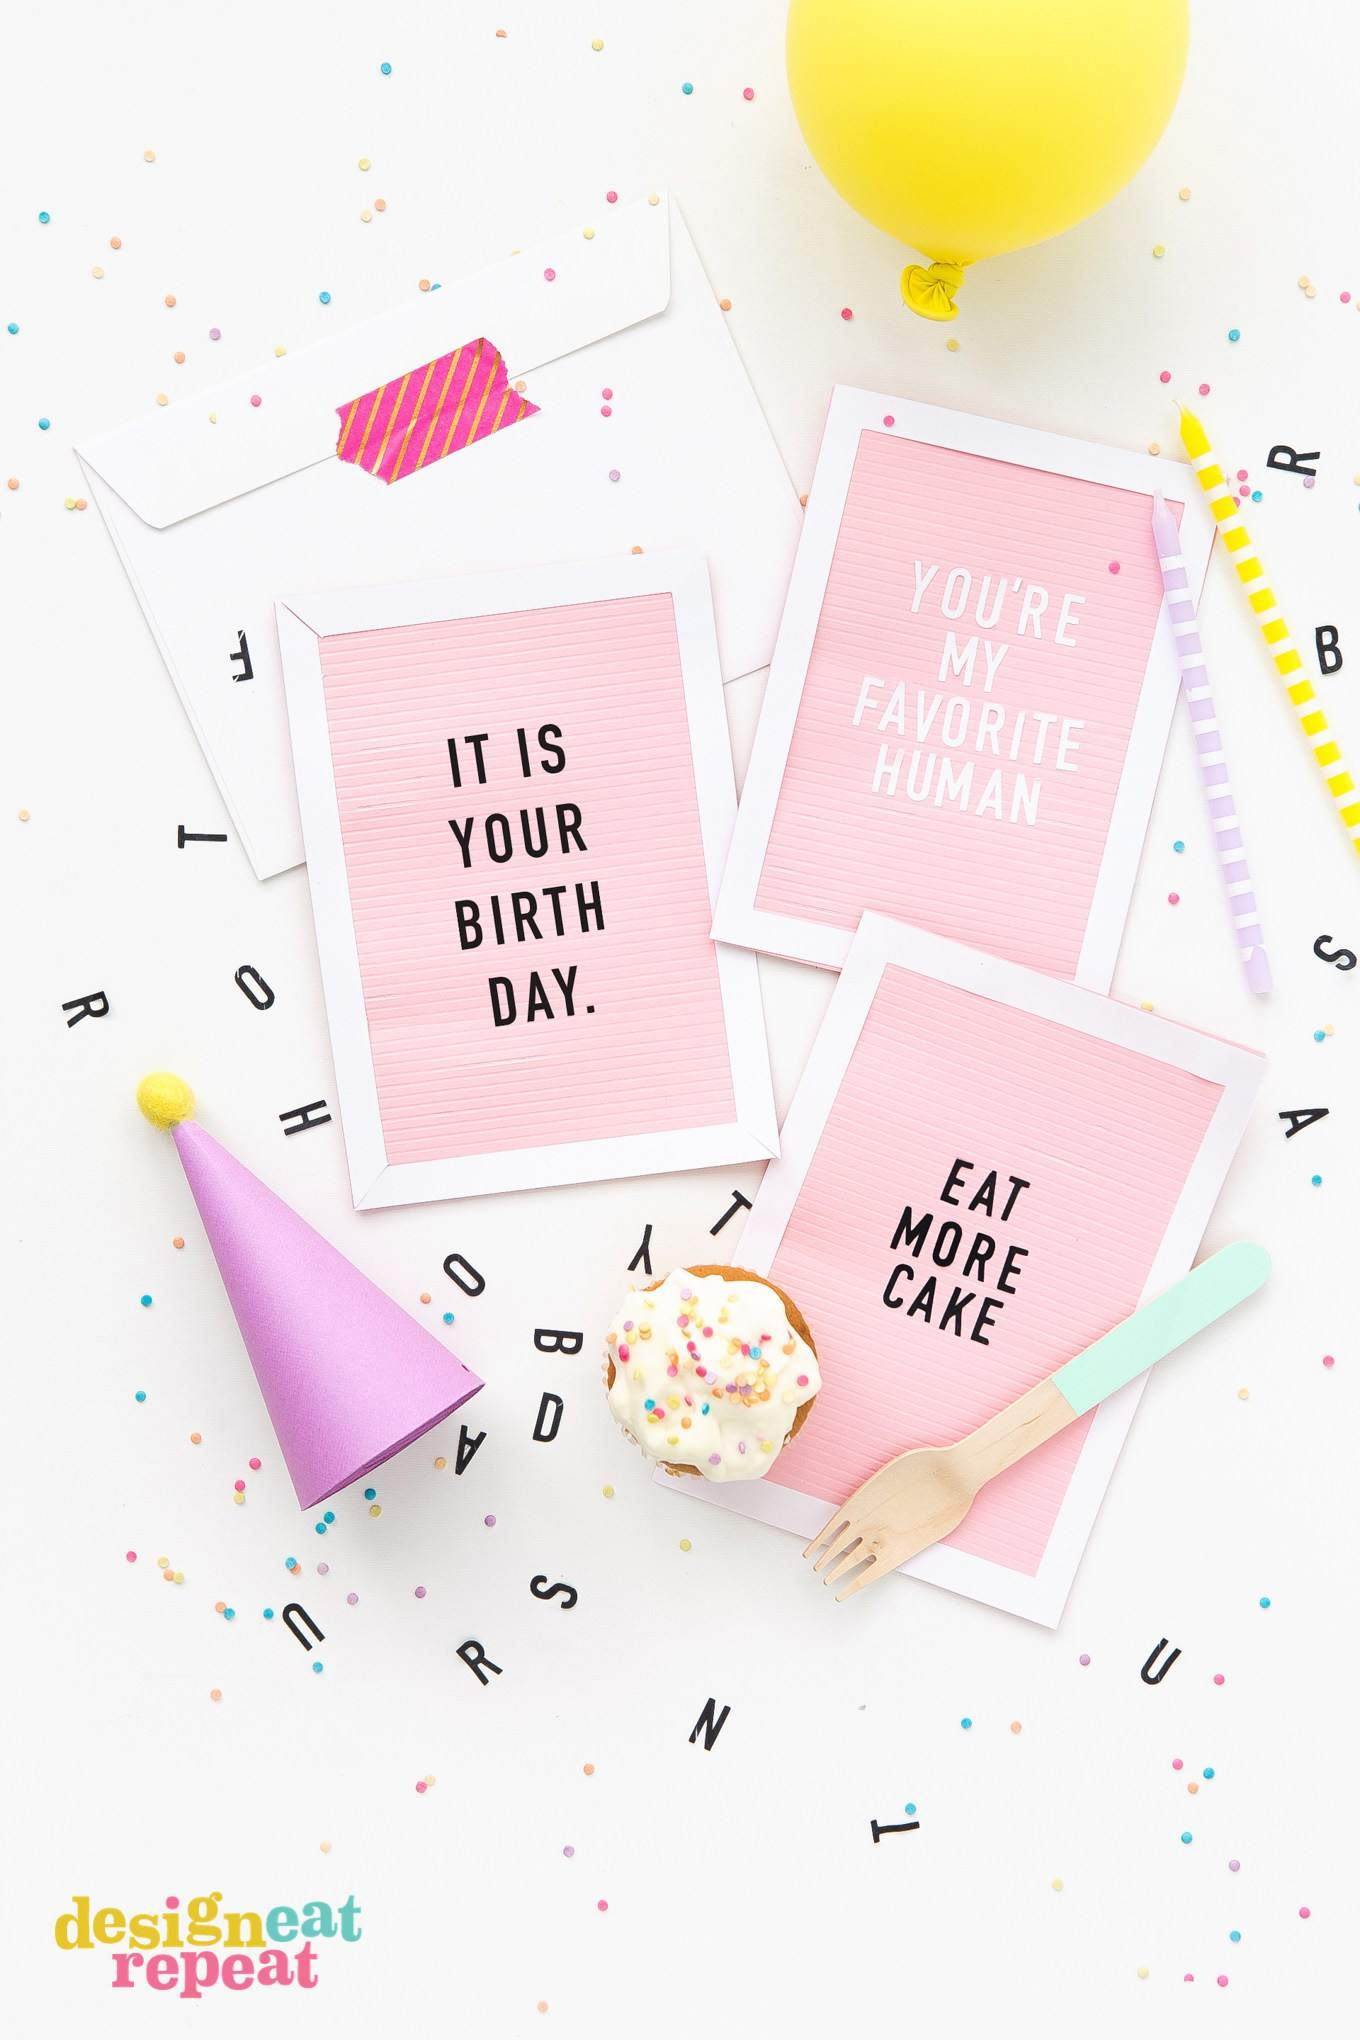 Cute Birthday Card Ideas For Your Boyfriend Get Inspiration From 25 Of The Best Diy Birthday Cards